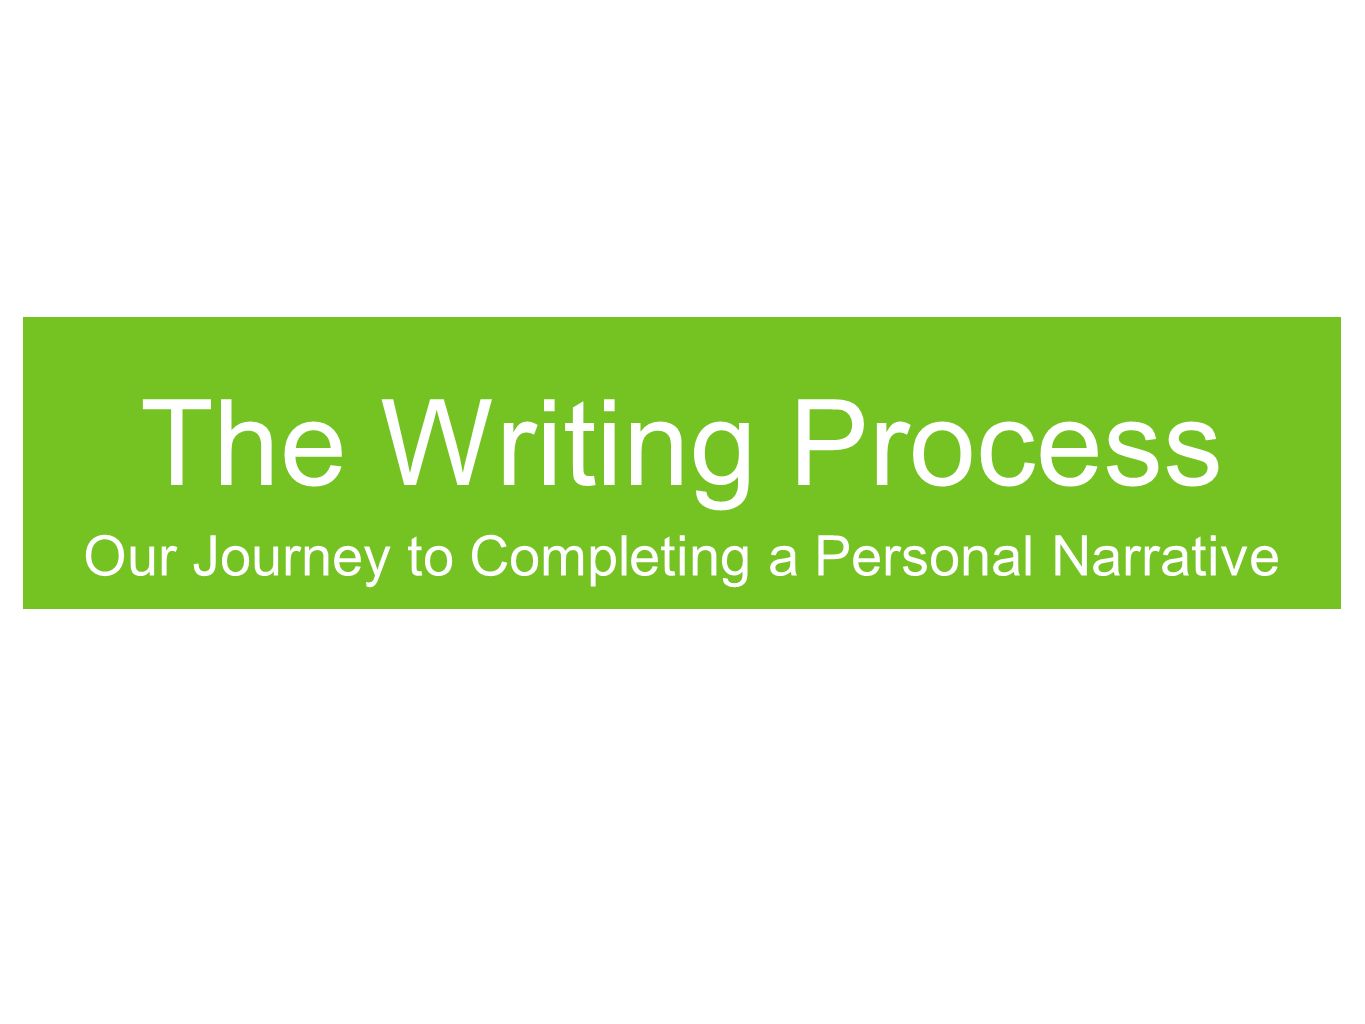 The Writing Process Our Journey to Completing a Personal Narrative